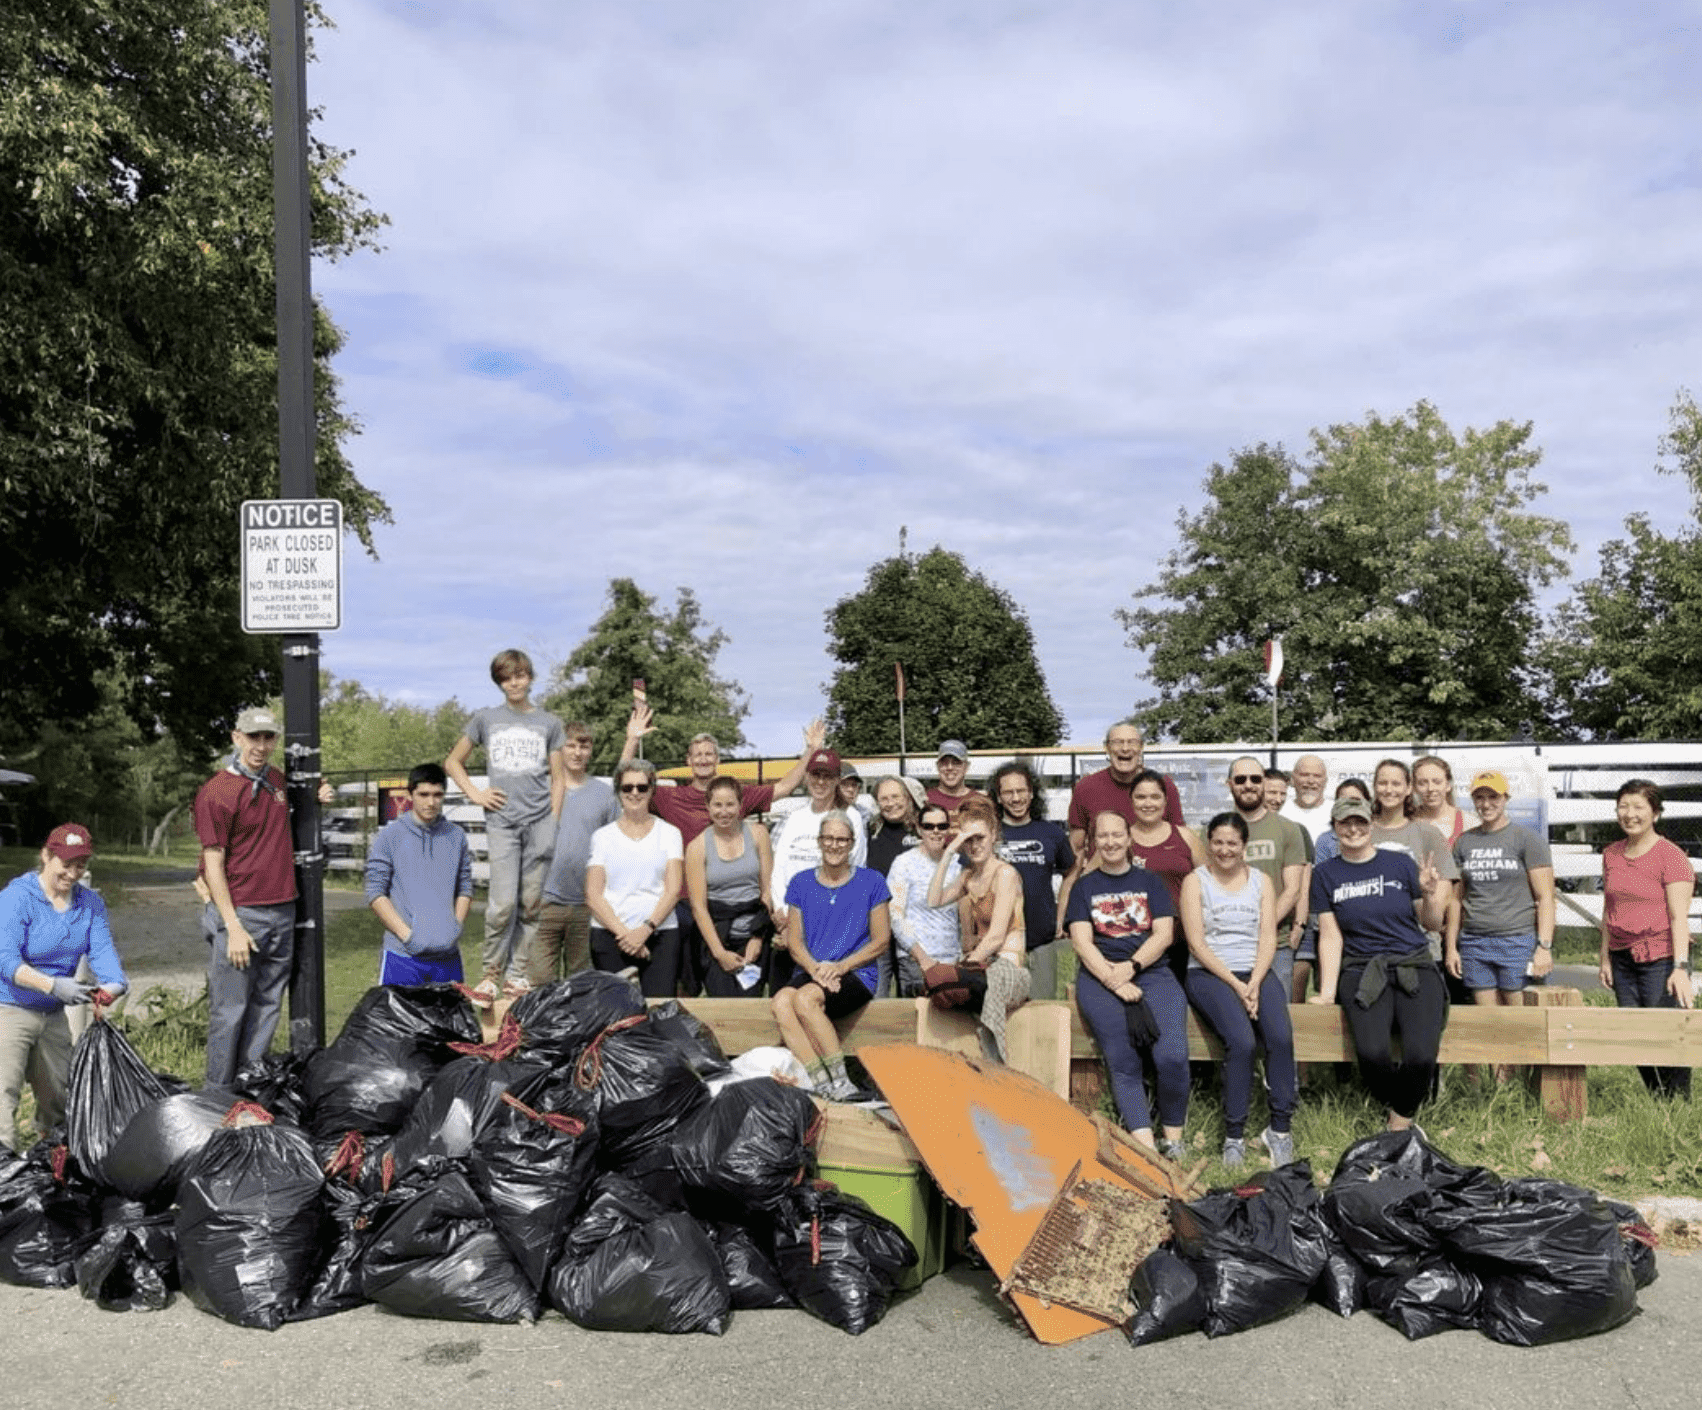 A group of people are pictured standing together near filled black bin bags. The black bin bags are filled with trash they have collected from the Charles River on a river clean event.